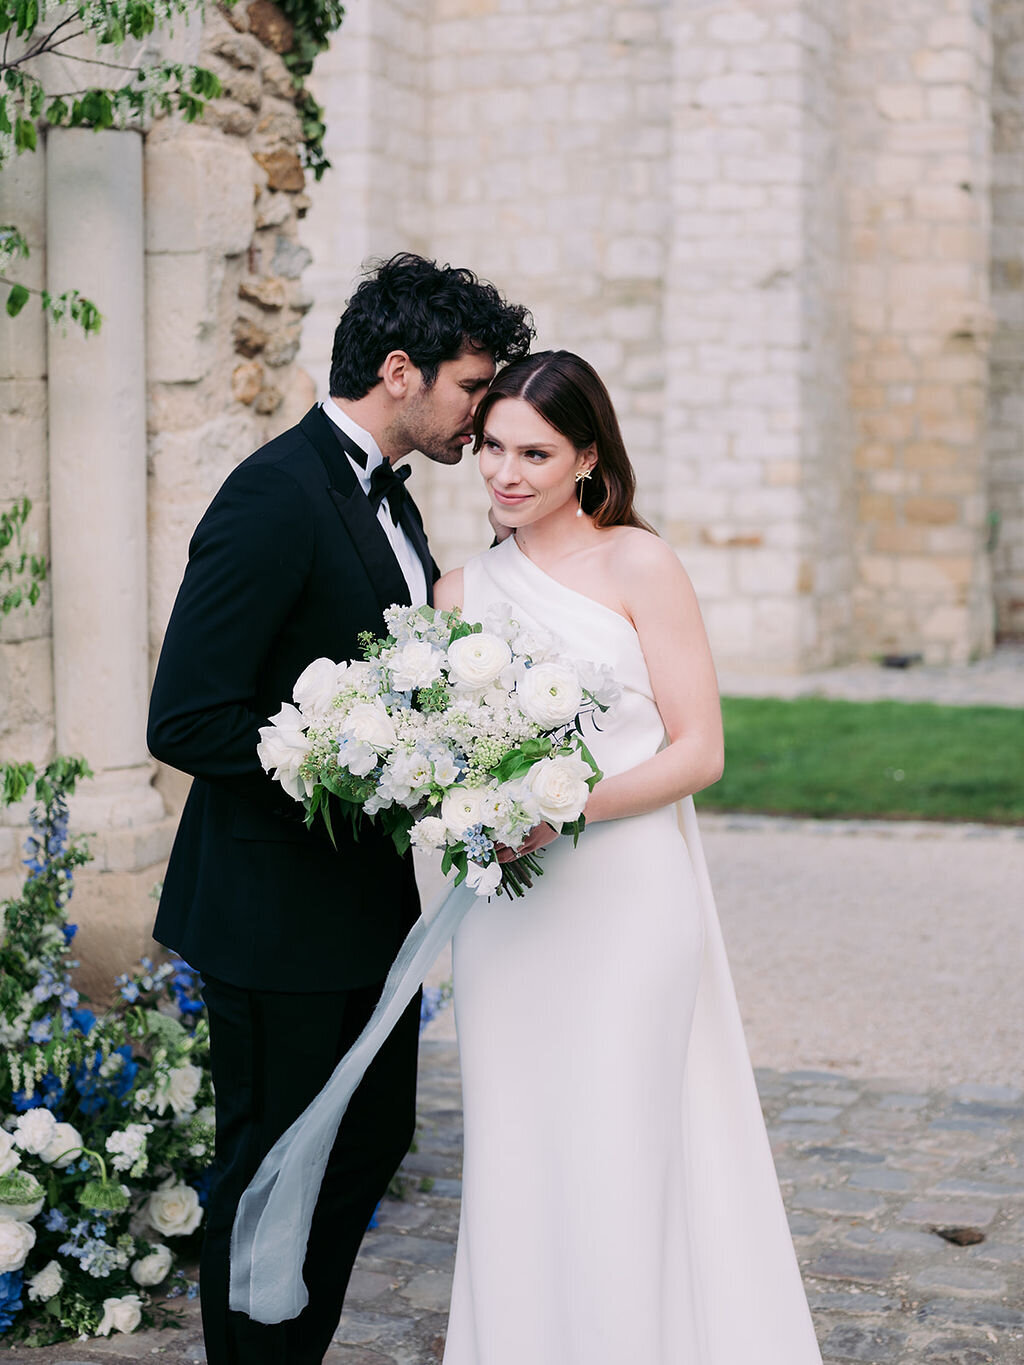 Bride and groom at the ceremony with the magnificent bridal bouquet